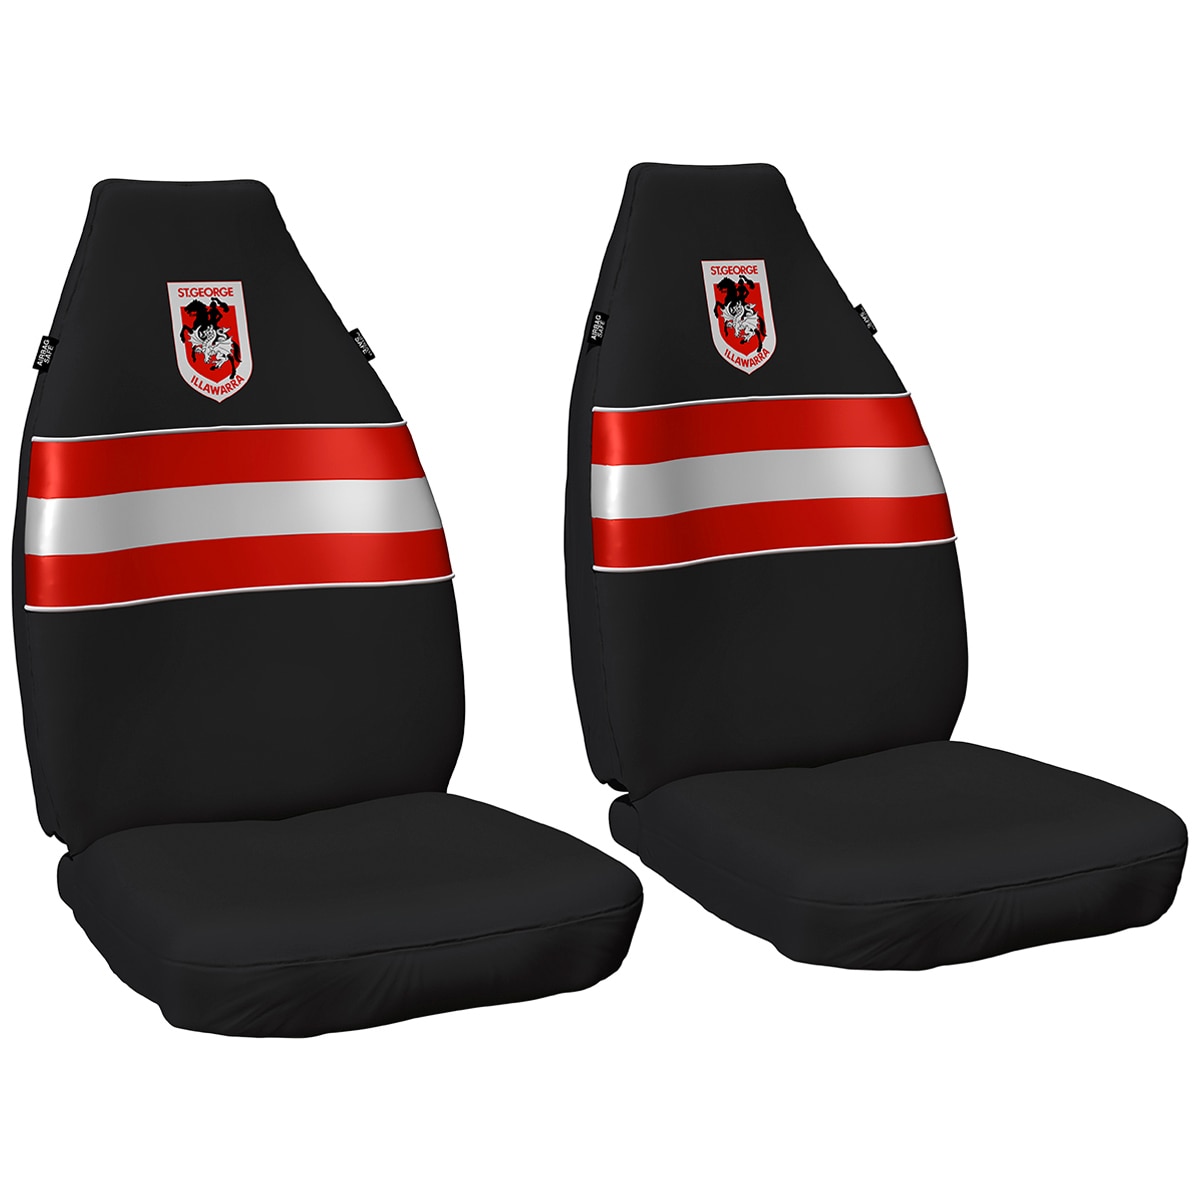 NRL Front Car Seat Covers Set Of 2 One Size Fits All New Zealand Warriors 